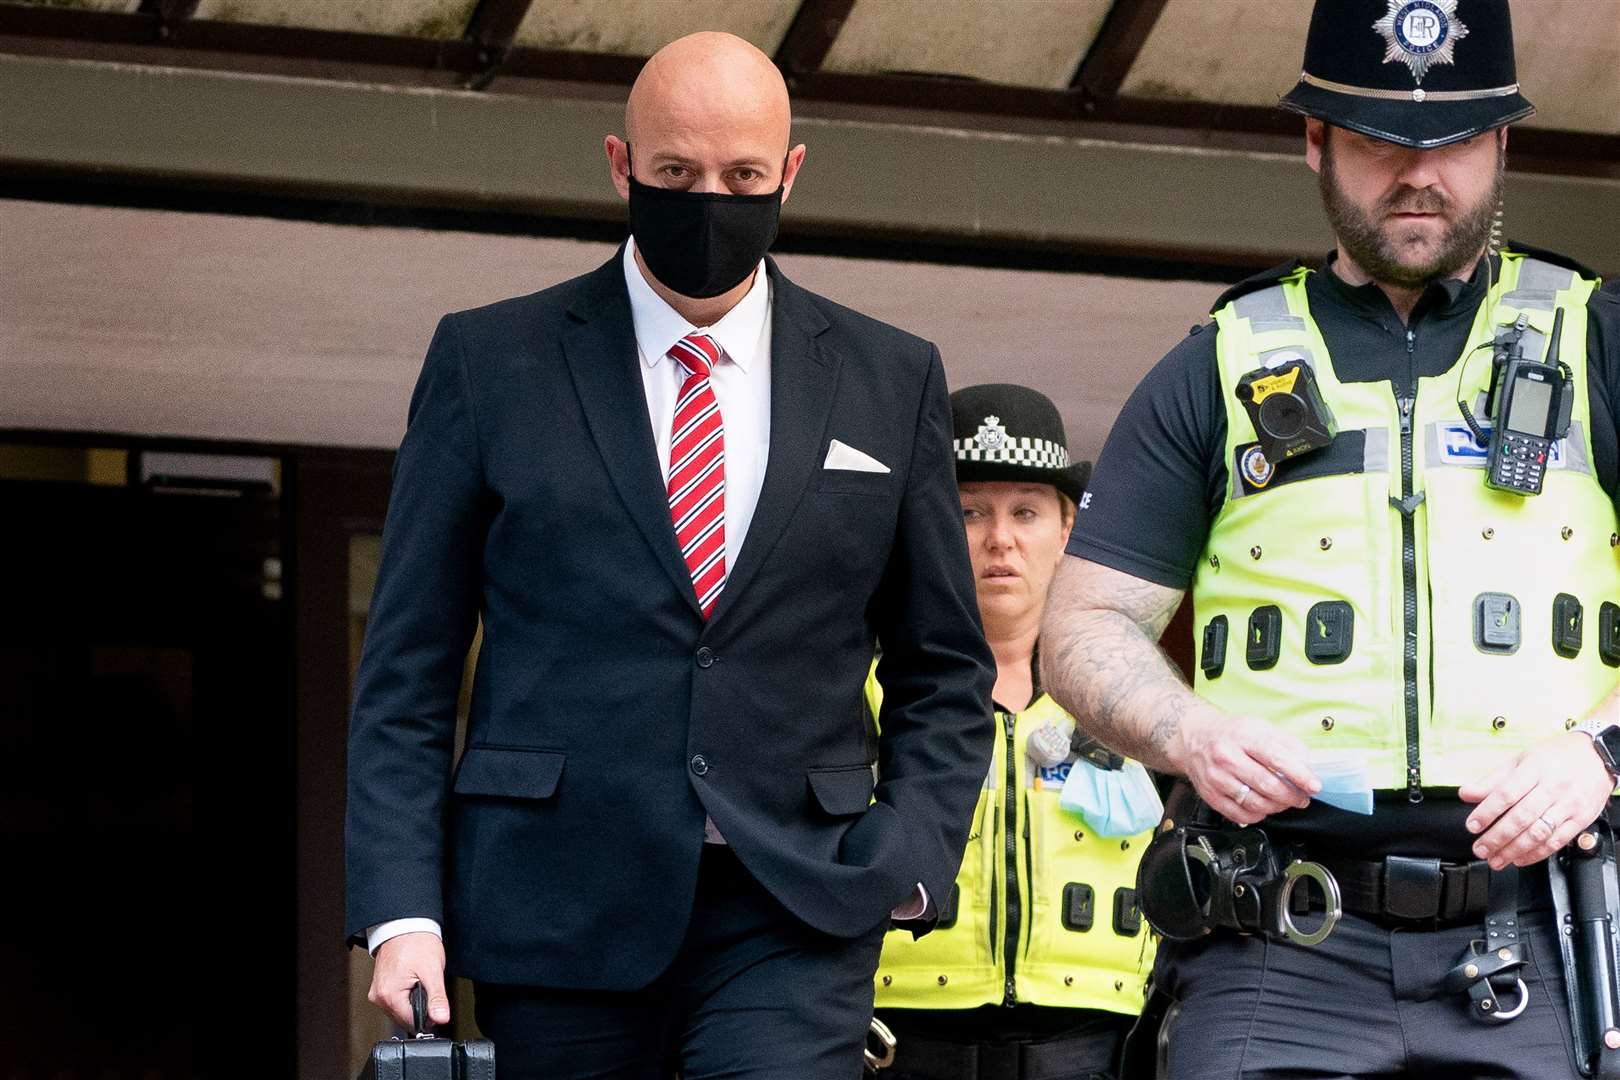 Former West Mercia Police constable Benjamin Monk is pictured leaving court prior to his sentencing (Joe Giddens/PA)